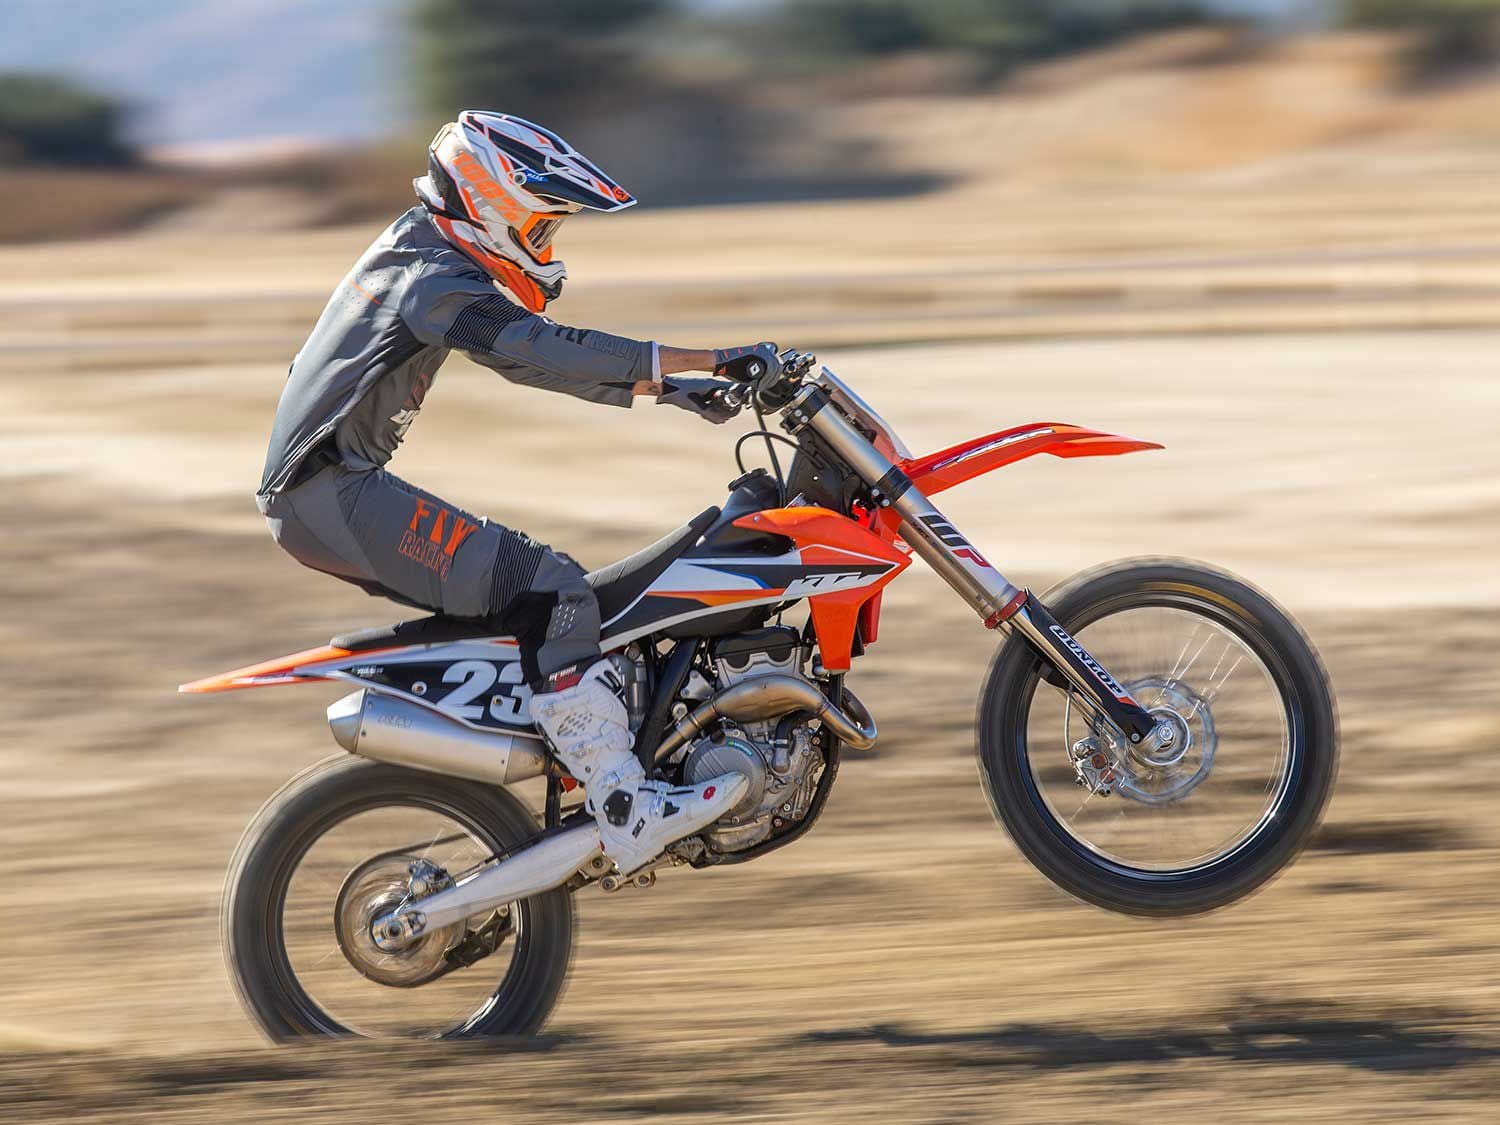 “The KTM 250 SX-F is an expert’s motorcycle that has widespread gear ratios and requires revs to make it go anywhere, but it is approachable to the everyday rider.” <em>—Michael Gilbert</em>